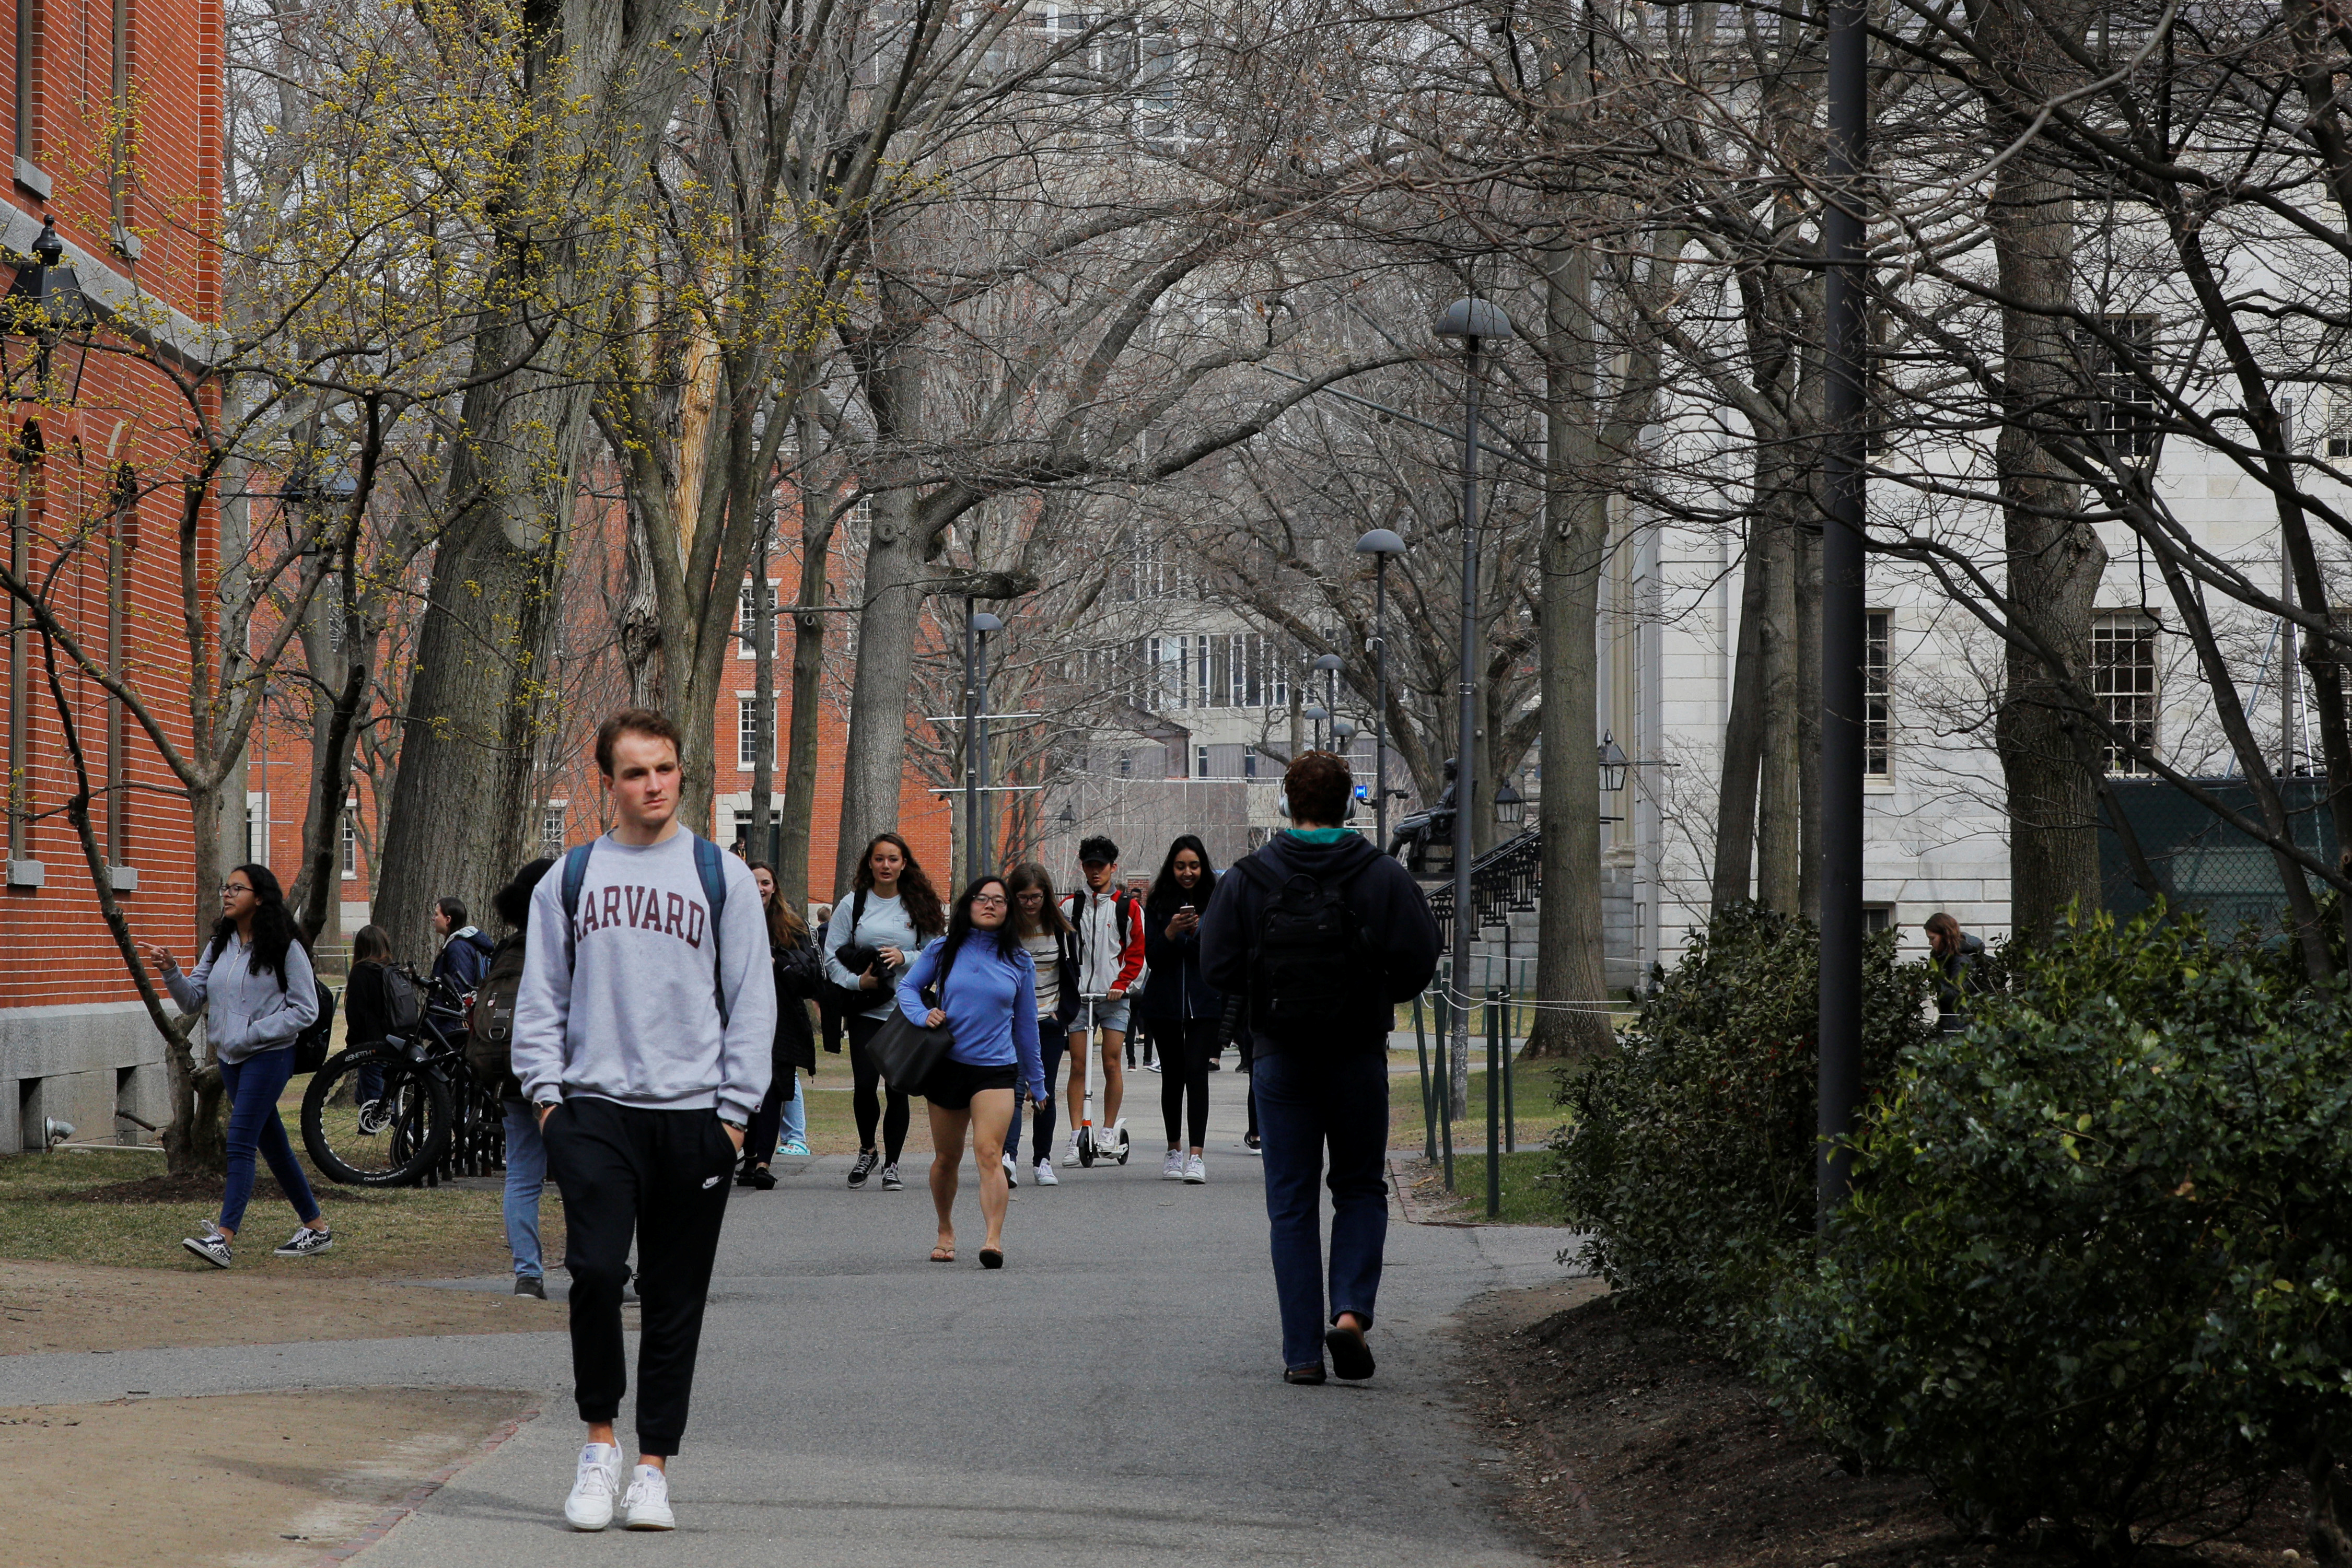 Students and pedestrians walk through the Yard at Harvard University in Cambridge